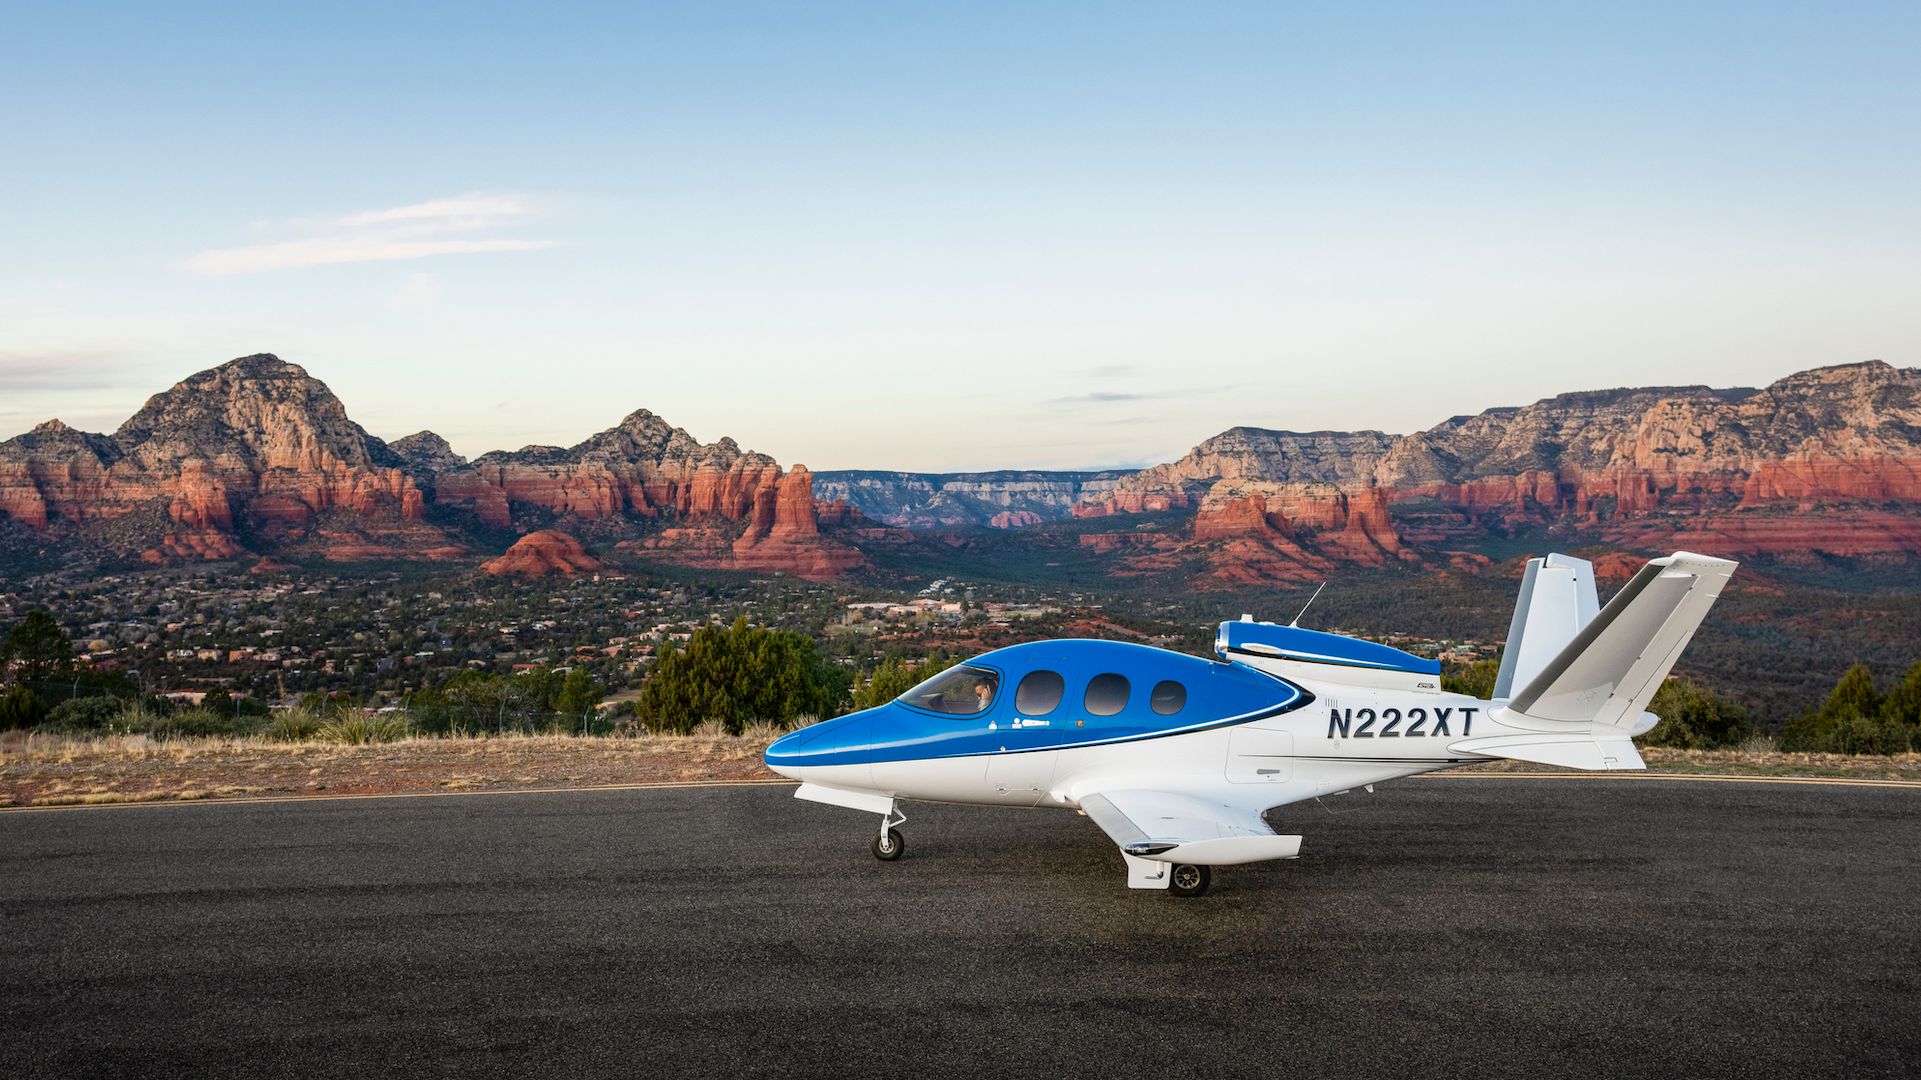 A Cirrus SF50 Vision Jet on an airport apron with mountains in the background.